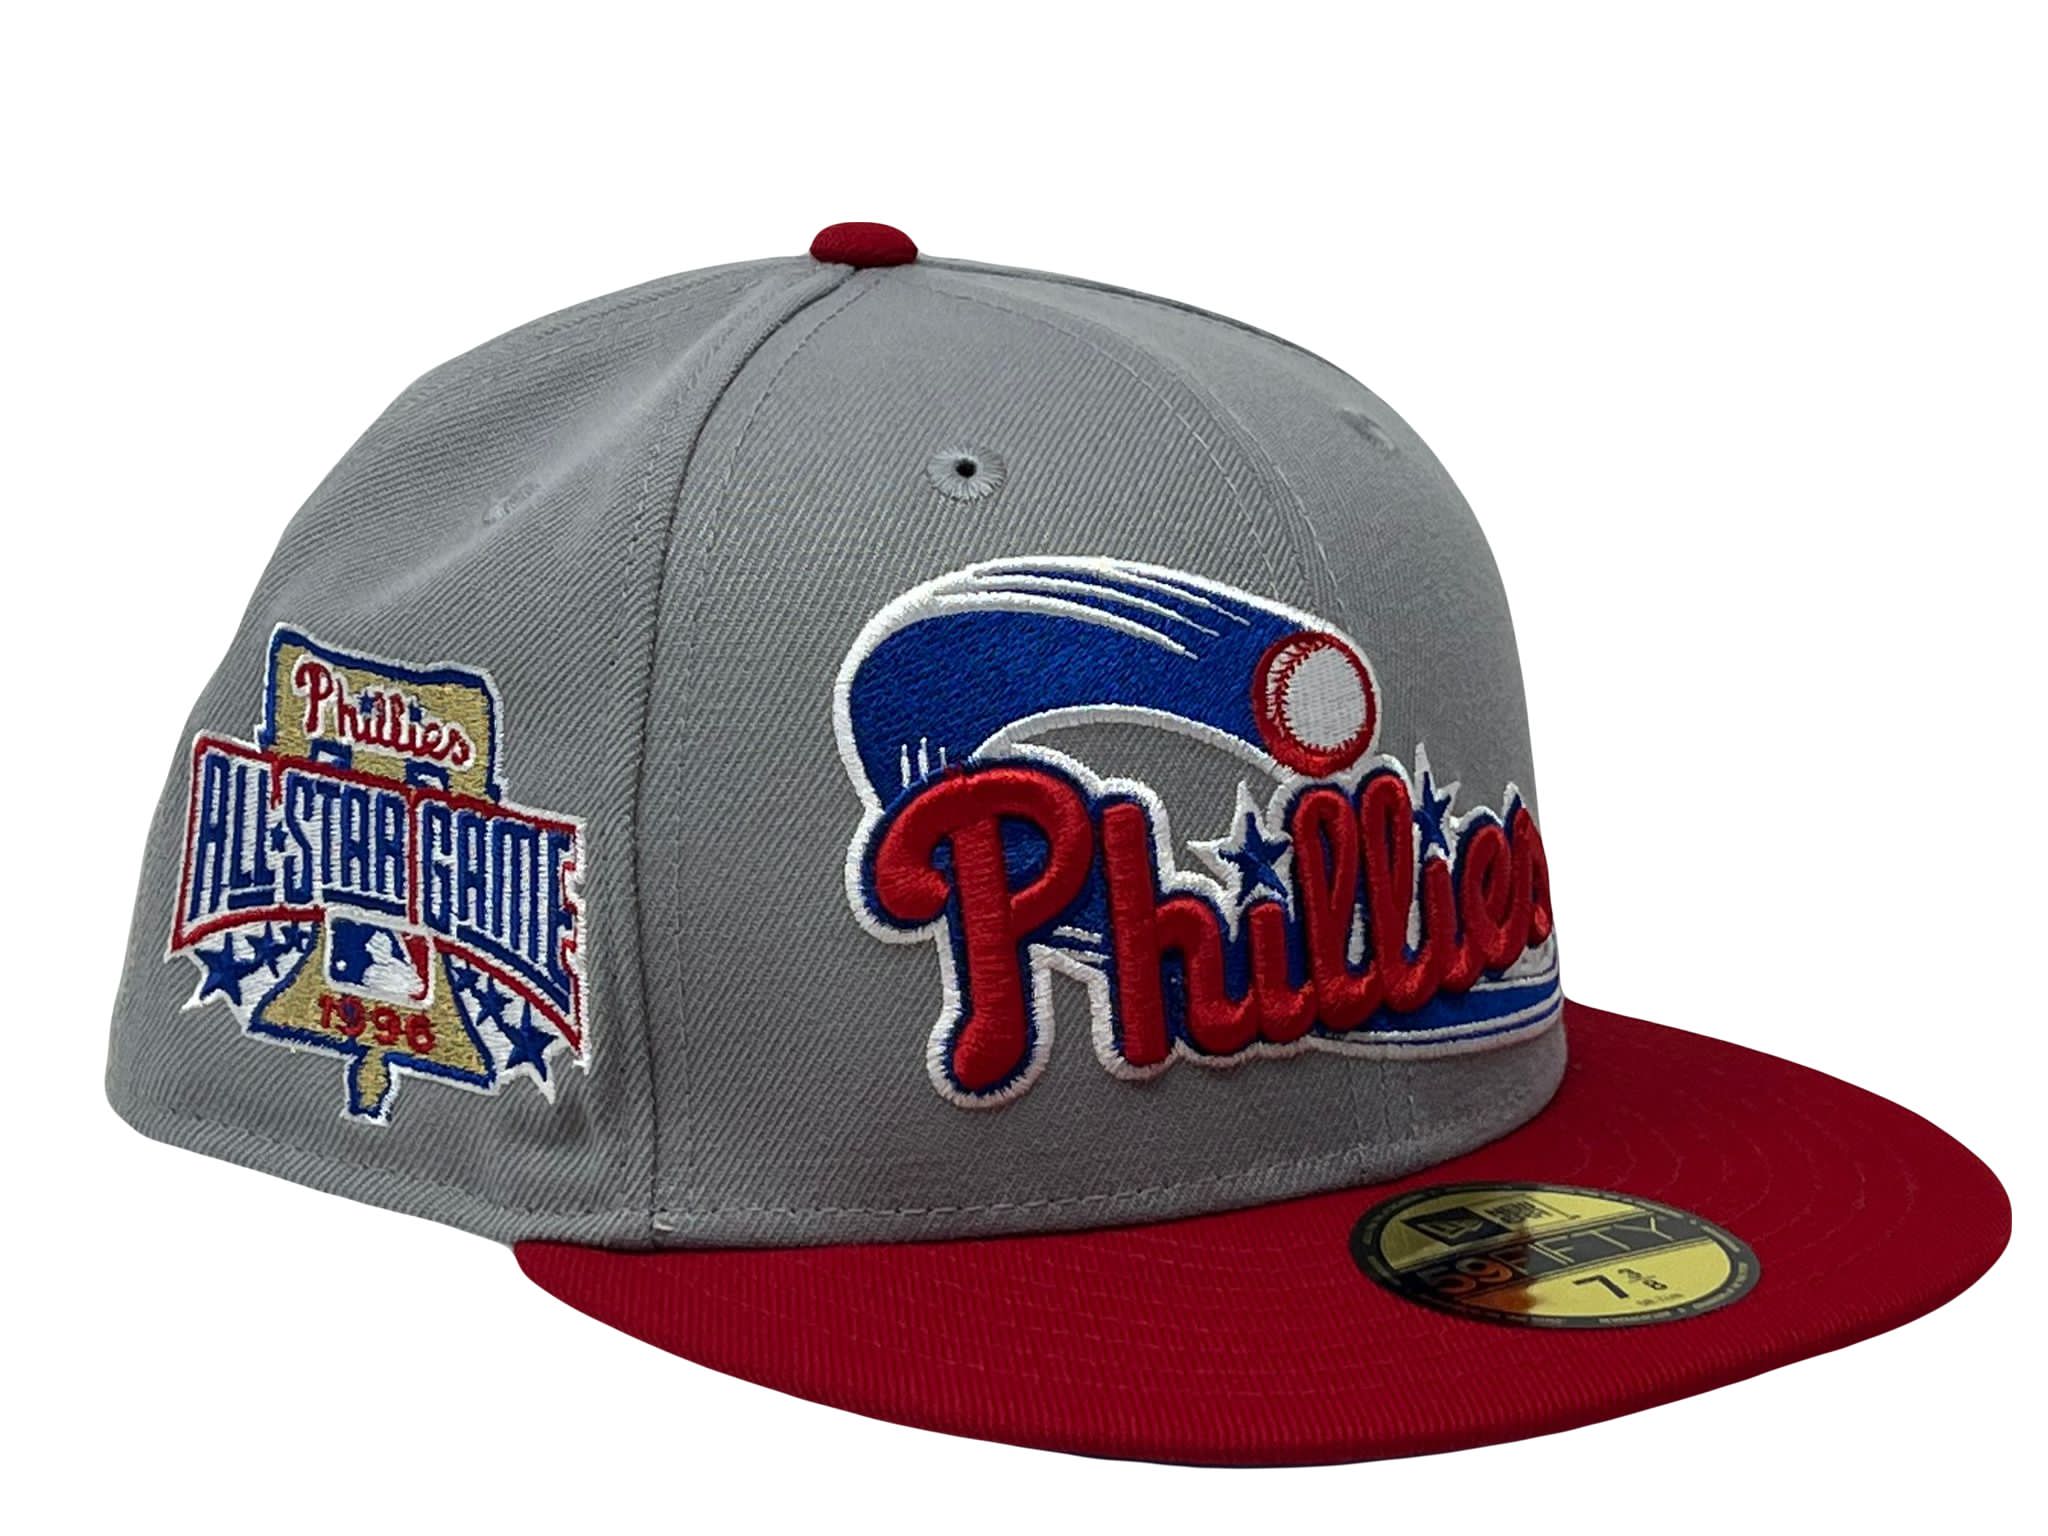 Philadelphia Phillies Chrome Hat God 5 Krispybrims 1996 ASG Patch Gray UV  59FIFTY Fitted Hat